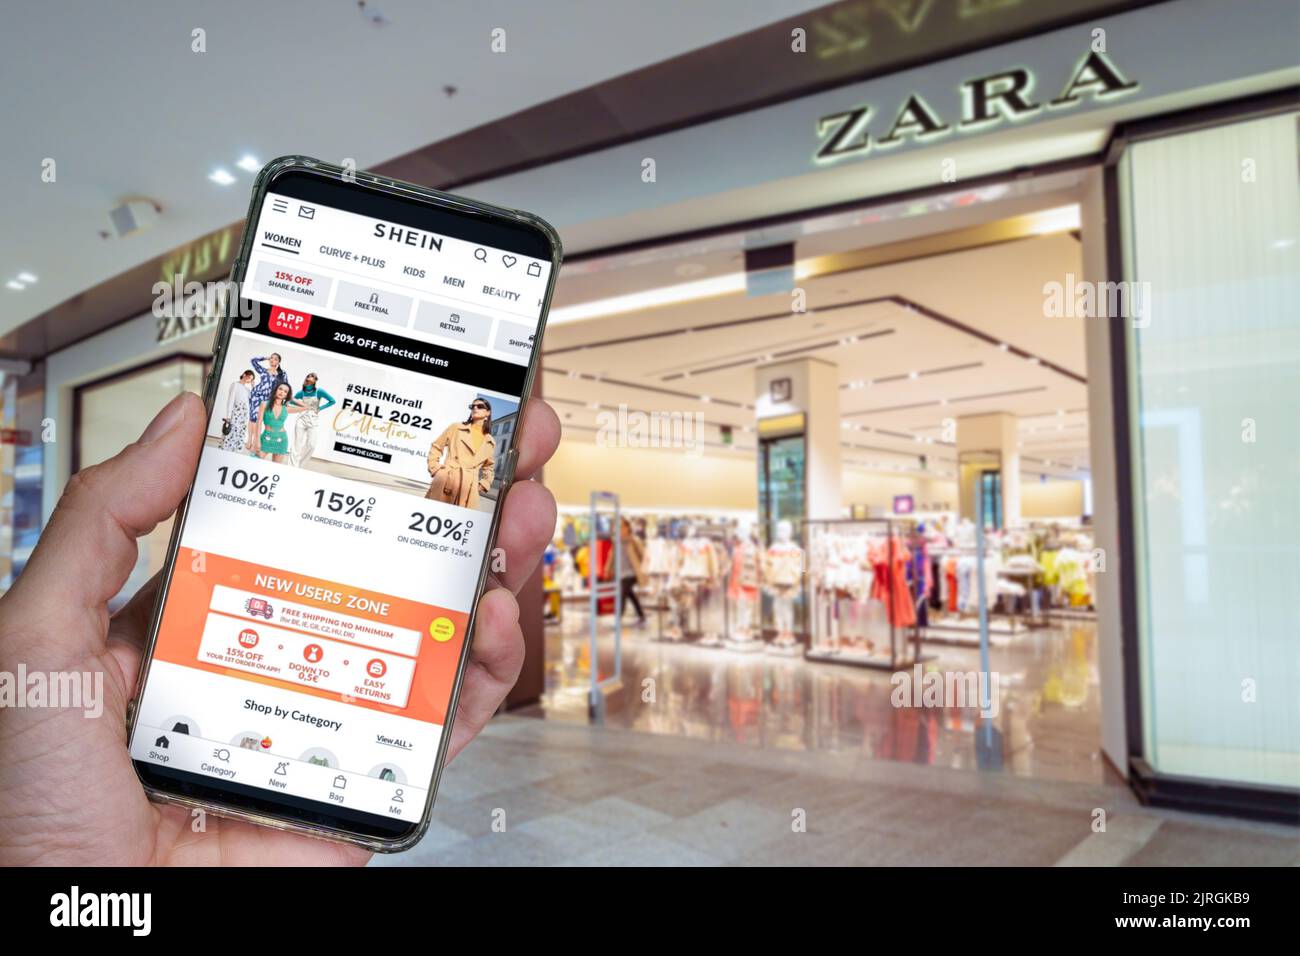 Zara Spanish clothes brand online delivery box. Hand on smartphone with  Inditex retailer collection web page, above delivered order package with  logo Stock Photo - Alamy